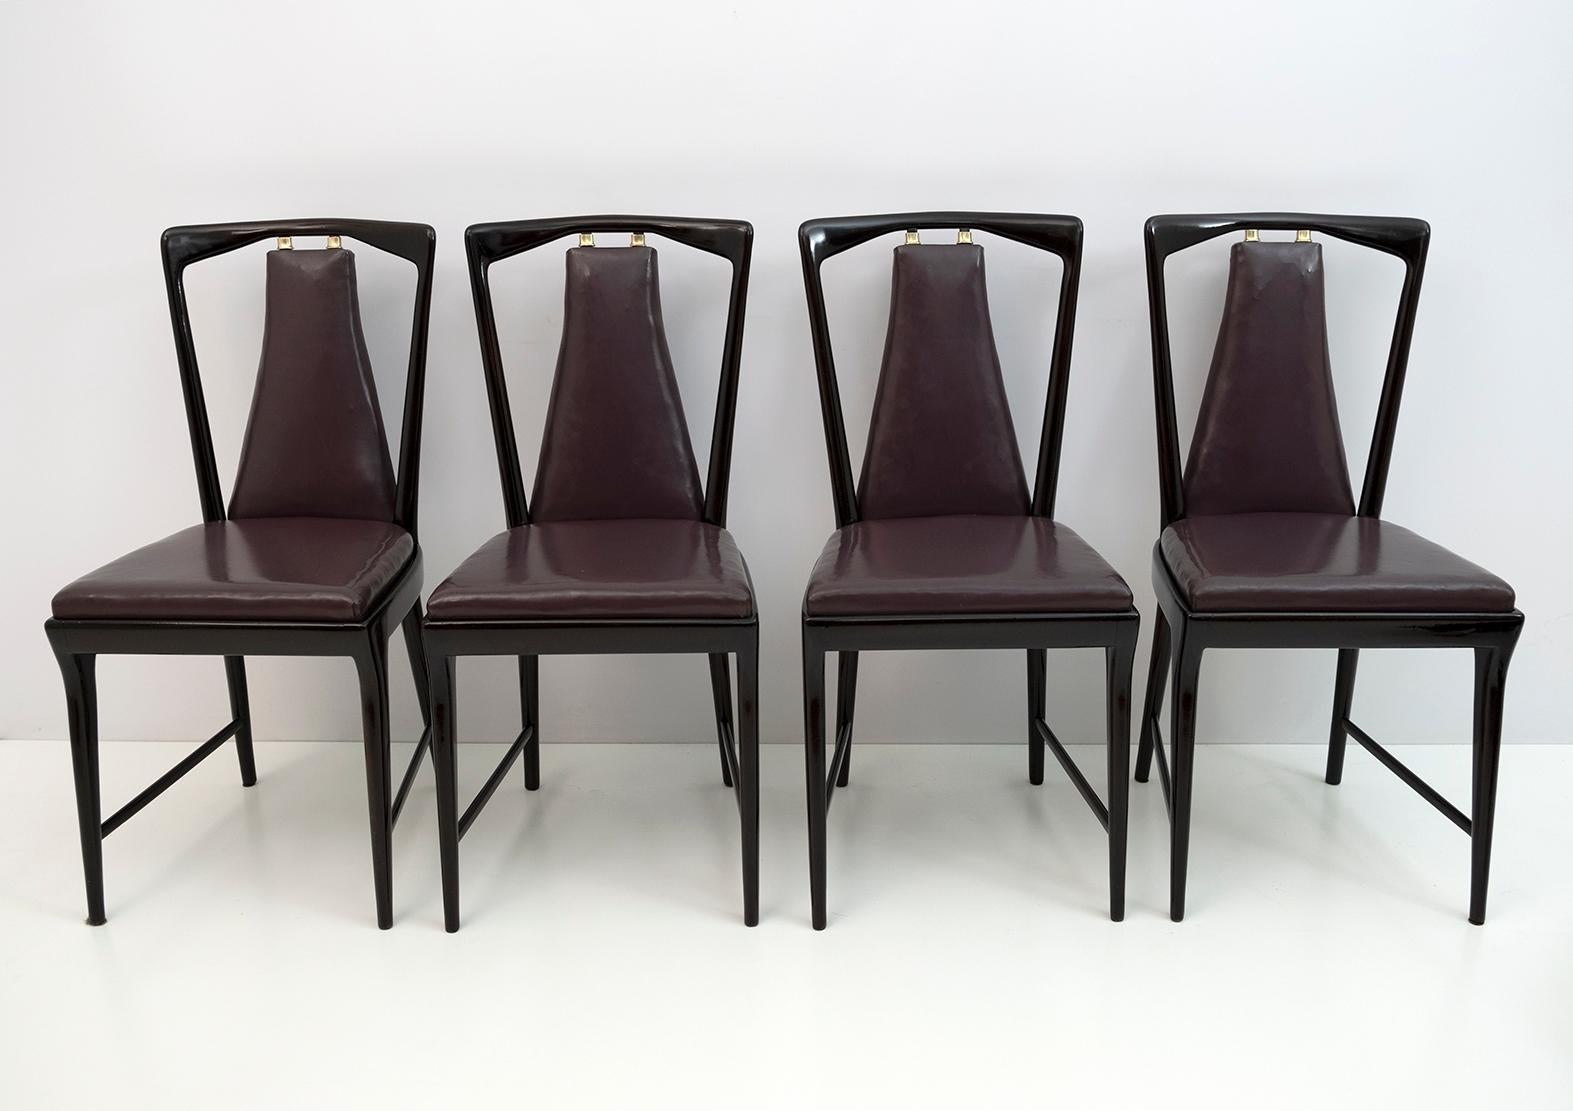 Elegant lines and solid structures for this splendid set of four dining chairs, designed by Osvaldo Borsani in the 1950s.
The wooden surfaces, as well as the backrests and the seats with their padding, are in excellent condition of the time with